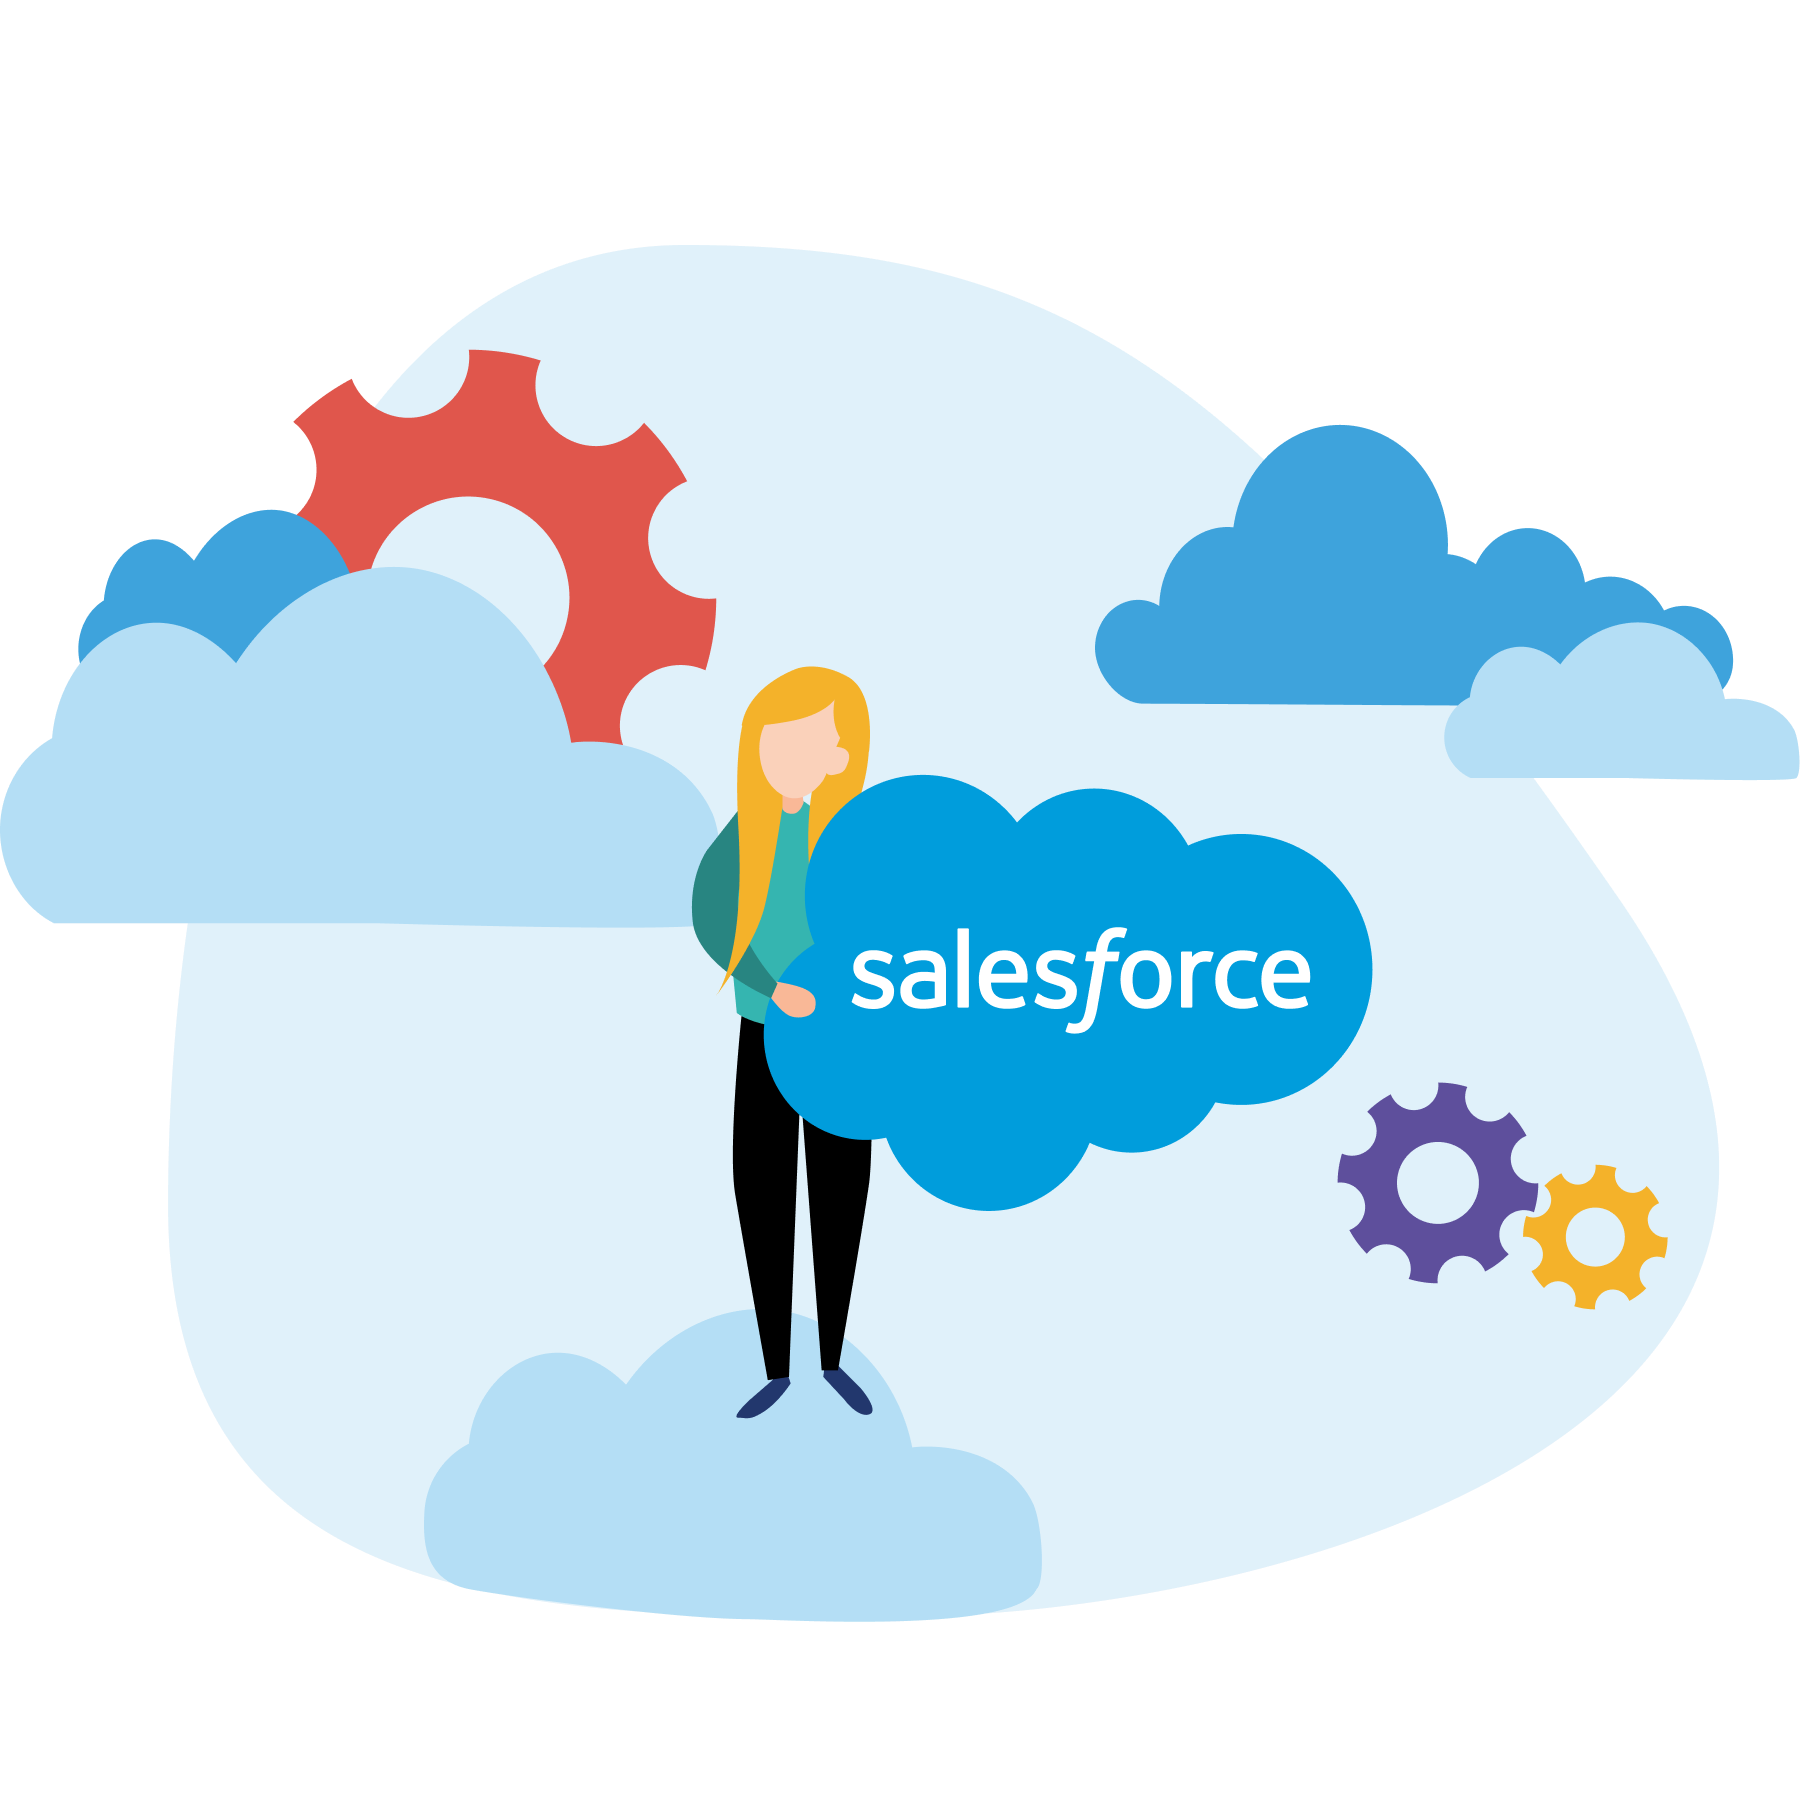 Extensive Salesforce expertise